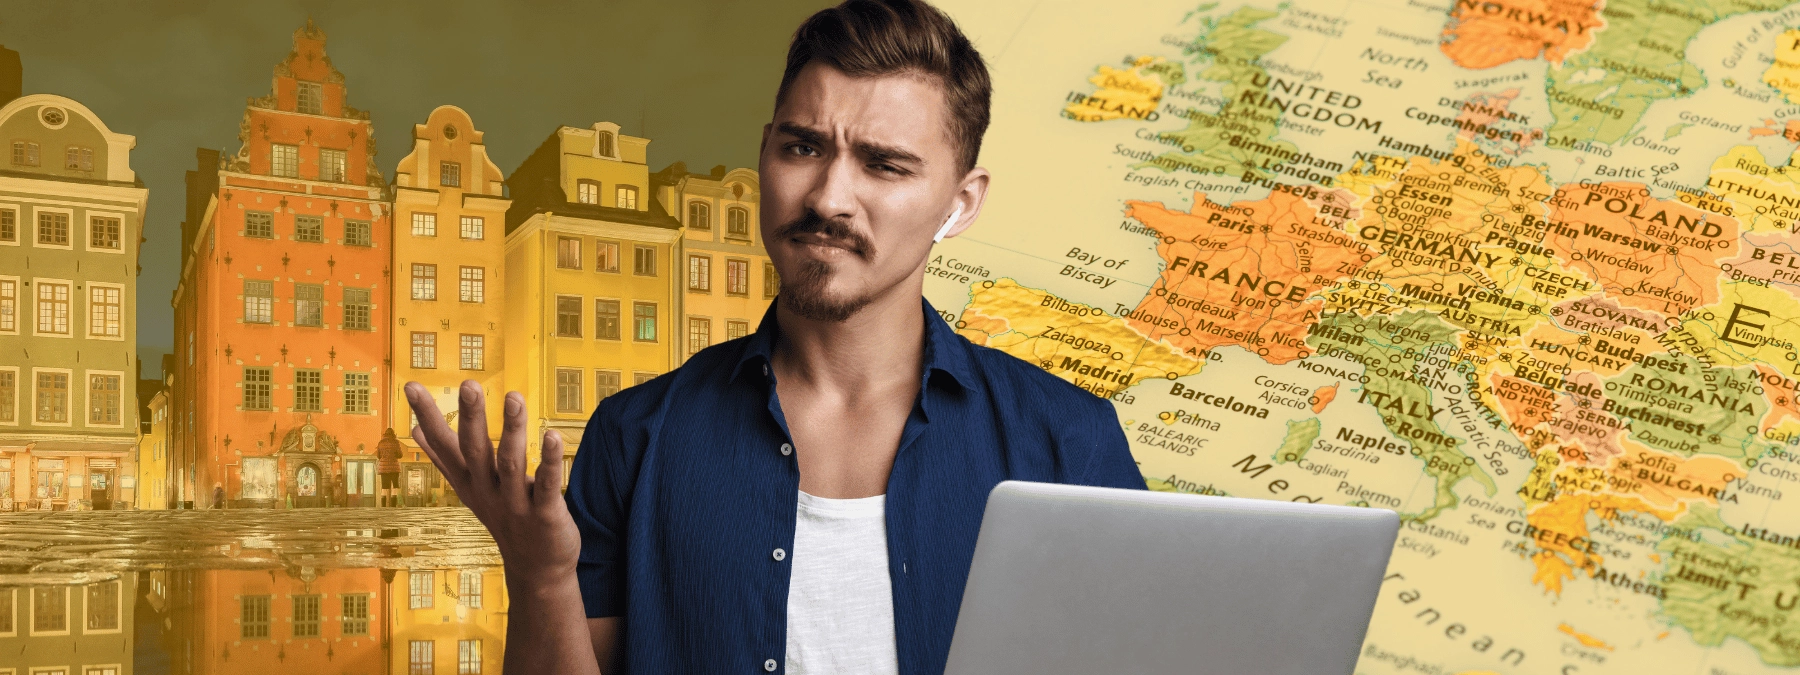 Man holding a laptop in front of a background of a map of Europe and a European city square